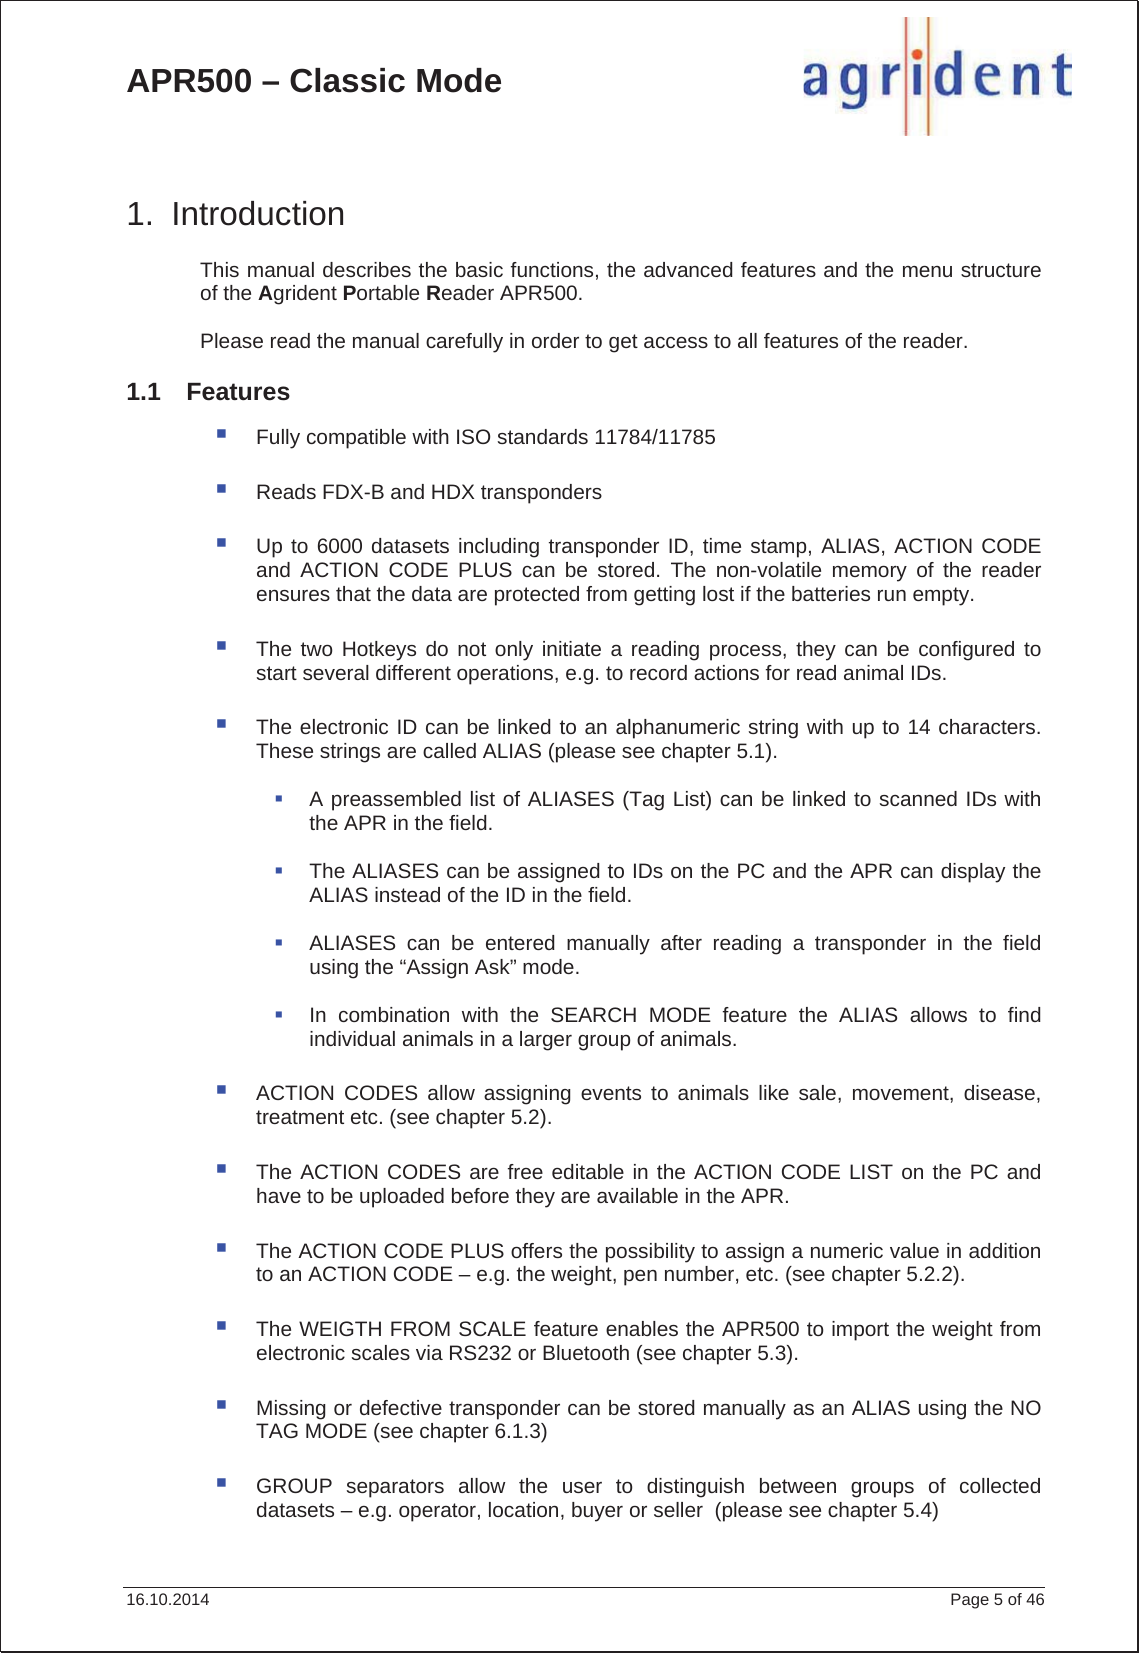 APR500 – Classic Mode 16.10.2014    Page 5 of 46 1. Introduction This manual describes the basic functions, the advanced features and the menu structure of the Agrident Portable Reader APR500. Please read the manual carefully in order to get access to all features of the reader. 1.1 Features Fully compatible with ISO standards 11784/11785 Reads FDX-B and HDX transponders Up to 6000 datasets including transponder ID, time stamp, ALIAS, ACTION CODE and ACTION CODE PLUS can be stored. The non-volatile memory of the reader ensures that the data are protected from getting lost if the batteries run empty. The two Hotkeys do not only initiate a reading process, they can be configured to start several different operations, e.g. to record actions for read animal IDs. The electronic ID can be linked to an alphanumeric string with up to 14 characters. These strings are called ALIAS (please see chapter 5.1). A preassembled list of ALIASES (Tag List) can be linked to scanned IDs with the APR in the field. The ALIASES can be assigned to IDs on the PC and the APR can display the ALIAS instead of the ID in the field. ALIASES can be entered manually after reading a transponder in the field using the “Assign Ask” mode. In combination with the SEARCH MODE feature the ALIAS allows to find individual animals in a larger group of animals. ACTION CODES allow assigning events to animals like sale, movement, disease, treatment etc. (see chapter 5.2). The ACTION CODES are free editable in the ACTION CODE LIST on the PC and have to be uploaded before they are available in the APR. The ACTION CODE PLUS offers the possibility to assign a numeric value in addition to an ACTION CODE – e.g. the weight, pen number, etc. (see chapter 5.2.2). The WEIGTH FROM SCALE feature enables the APR500 to import the weight from electronic scales via RS232 or Bluetooth (see chapter 5.3). Missing or defective transponder can be stored manually as an ALIAS using the NO TAG MODE (see chapter 6.1.3) GROUP separators allow the user to distinguish between groups of collected datasets – e.g. operator, location, buyer or seller  (please see chapter 5.4) 